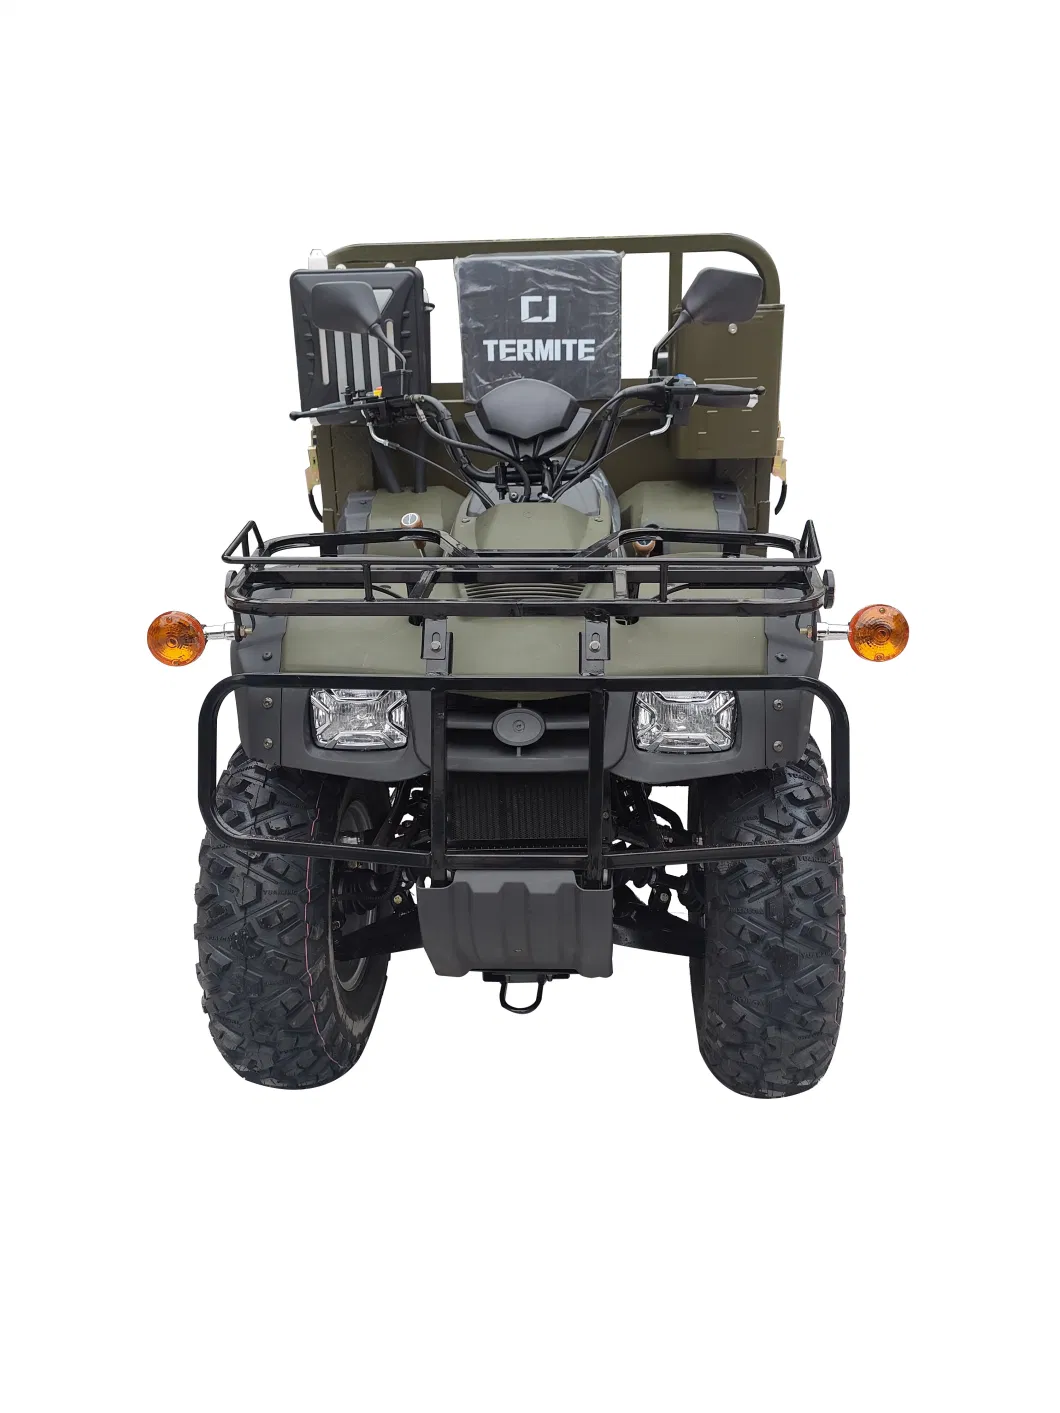 off-Road Vehicle with Water-Cooled Engine and 4WD